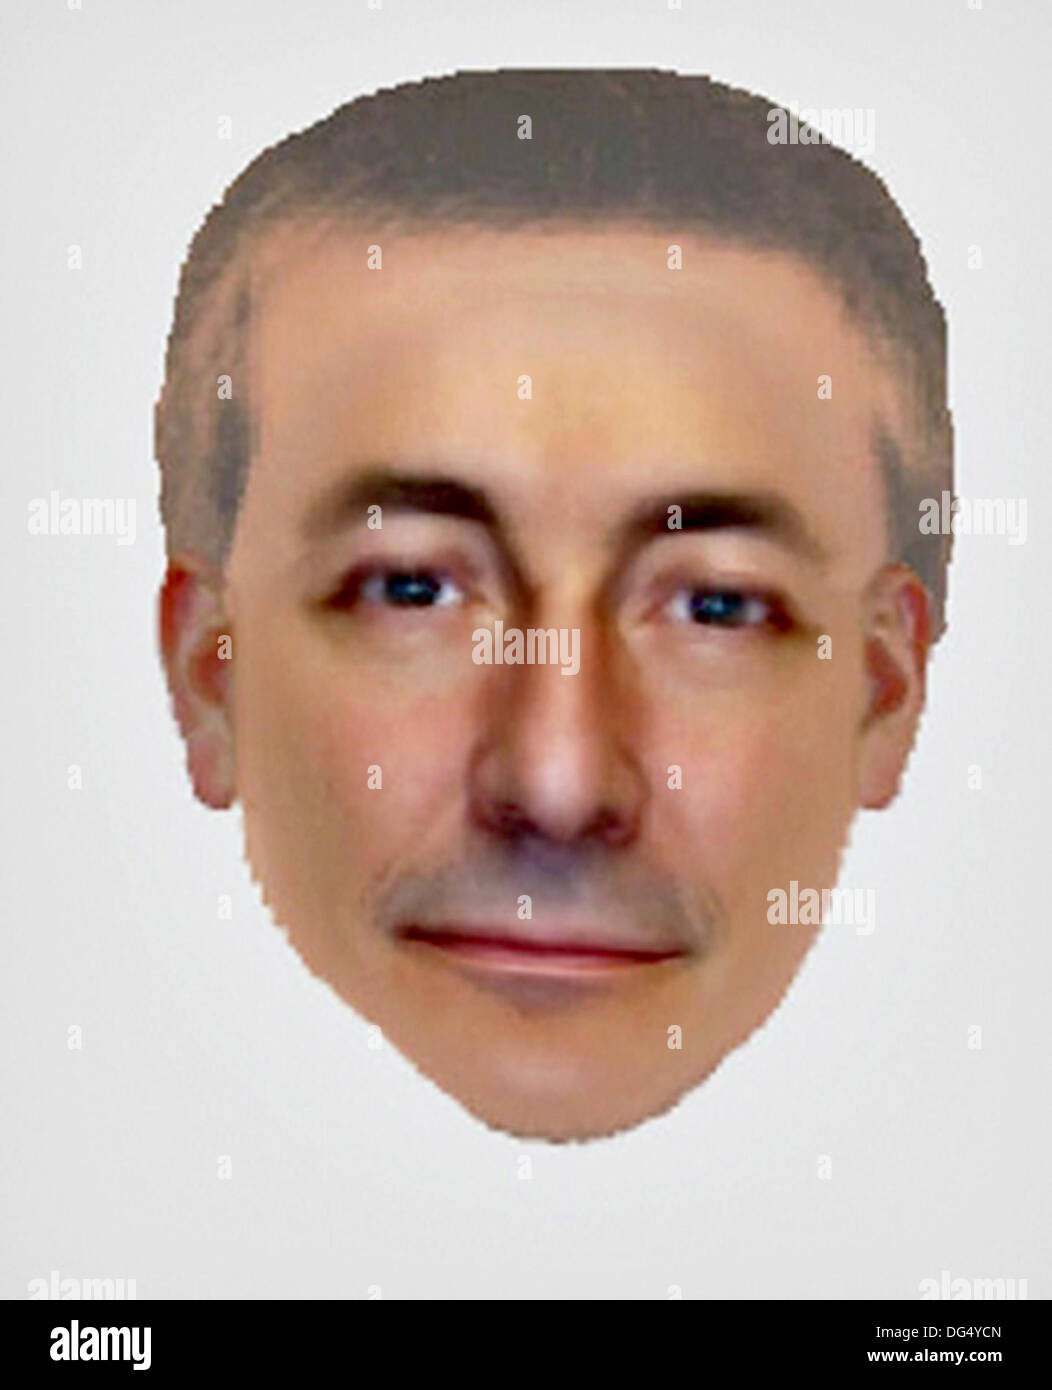 Handout E-FIT image from the Metropolitan Police showing one of the men wanted in possible connection with the 2007 disappearance of Madeleine McCann. 14th October, 2013. Stock Photo